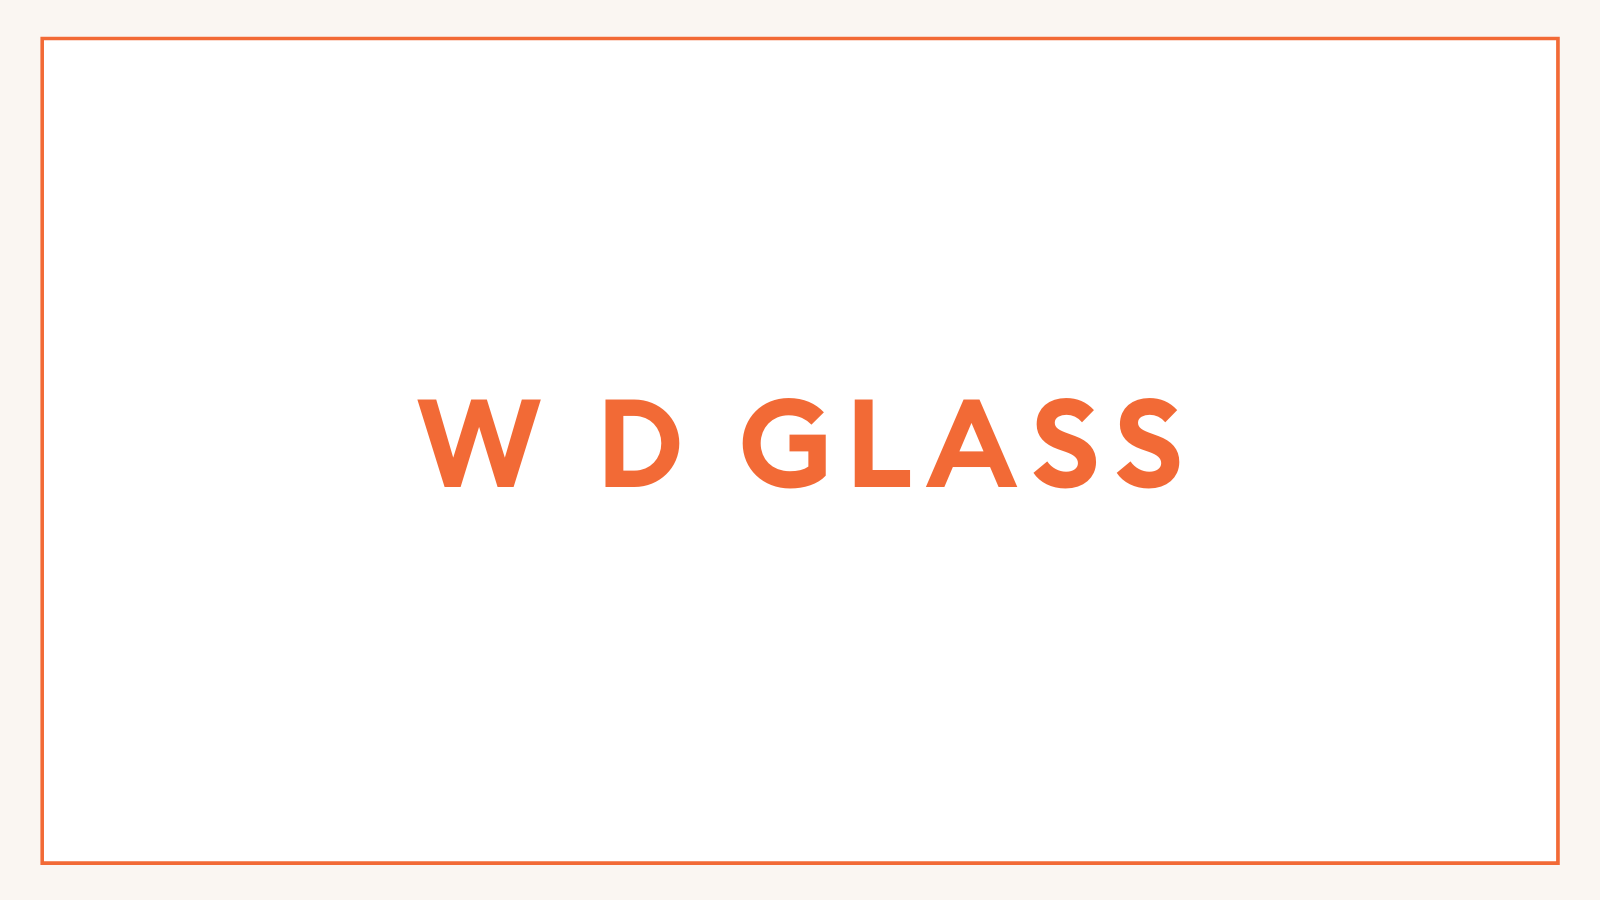 W D GLASS.png